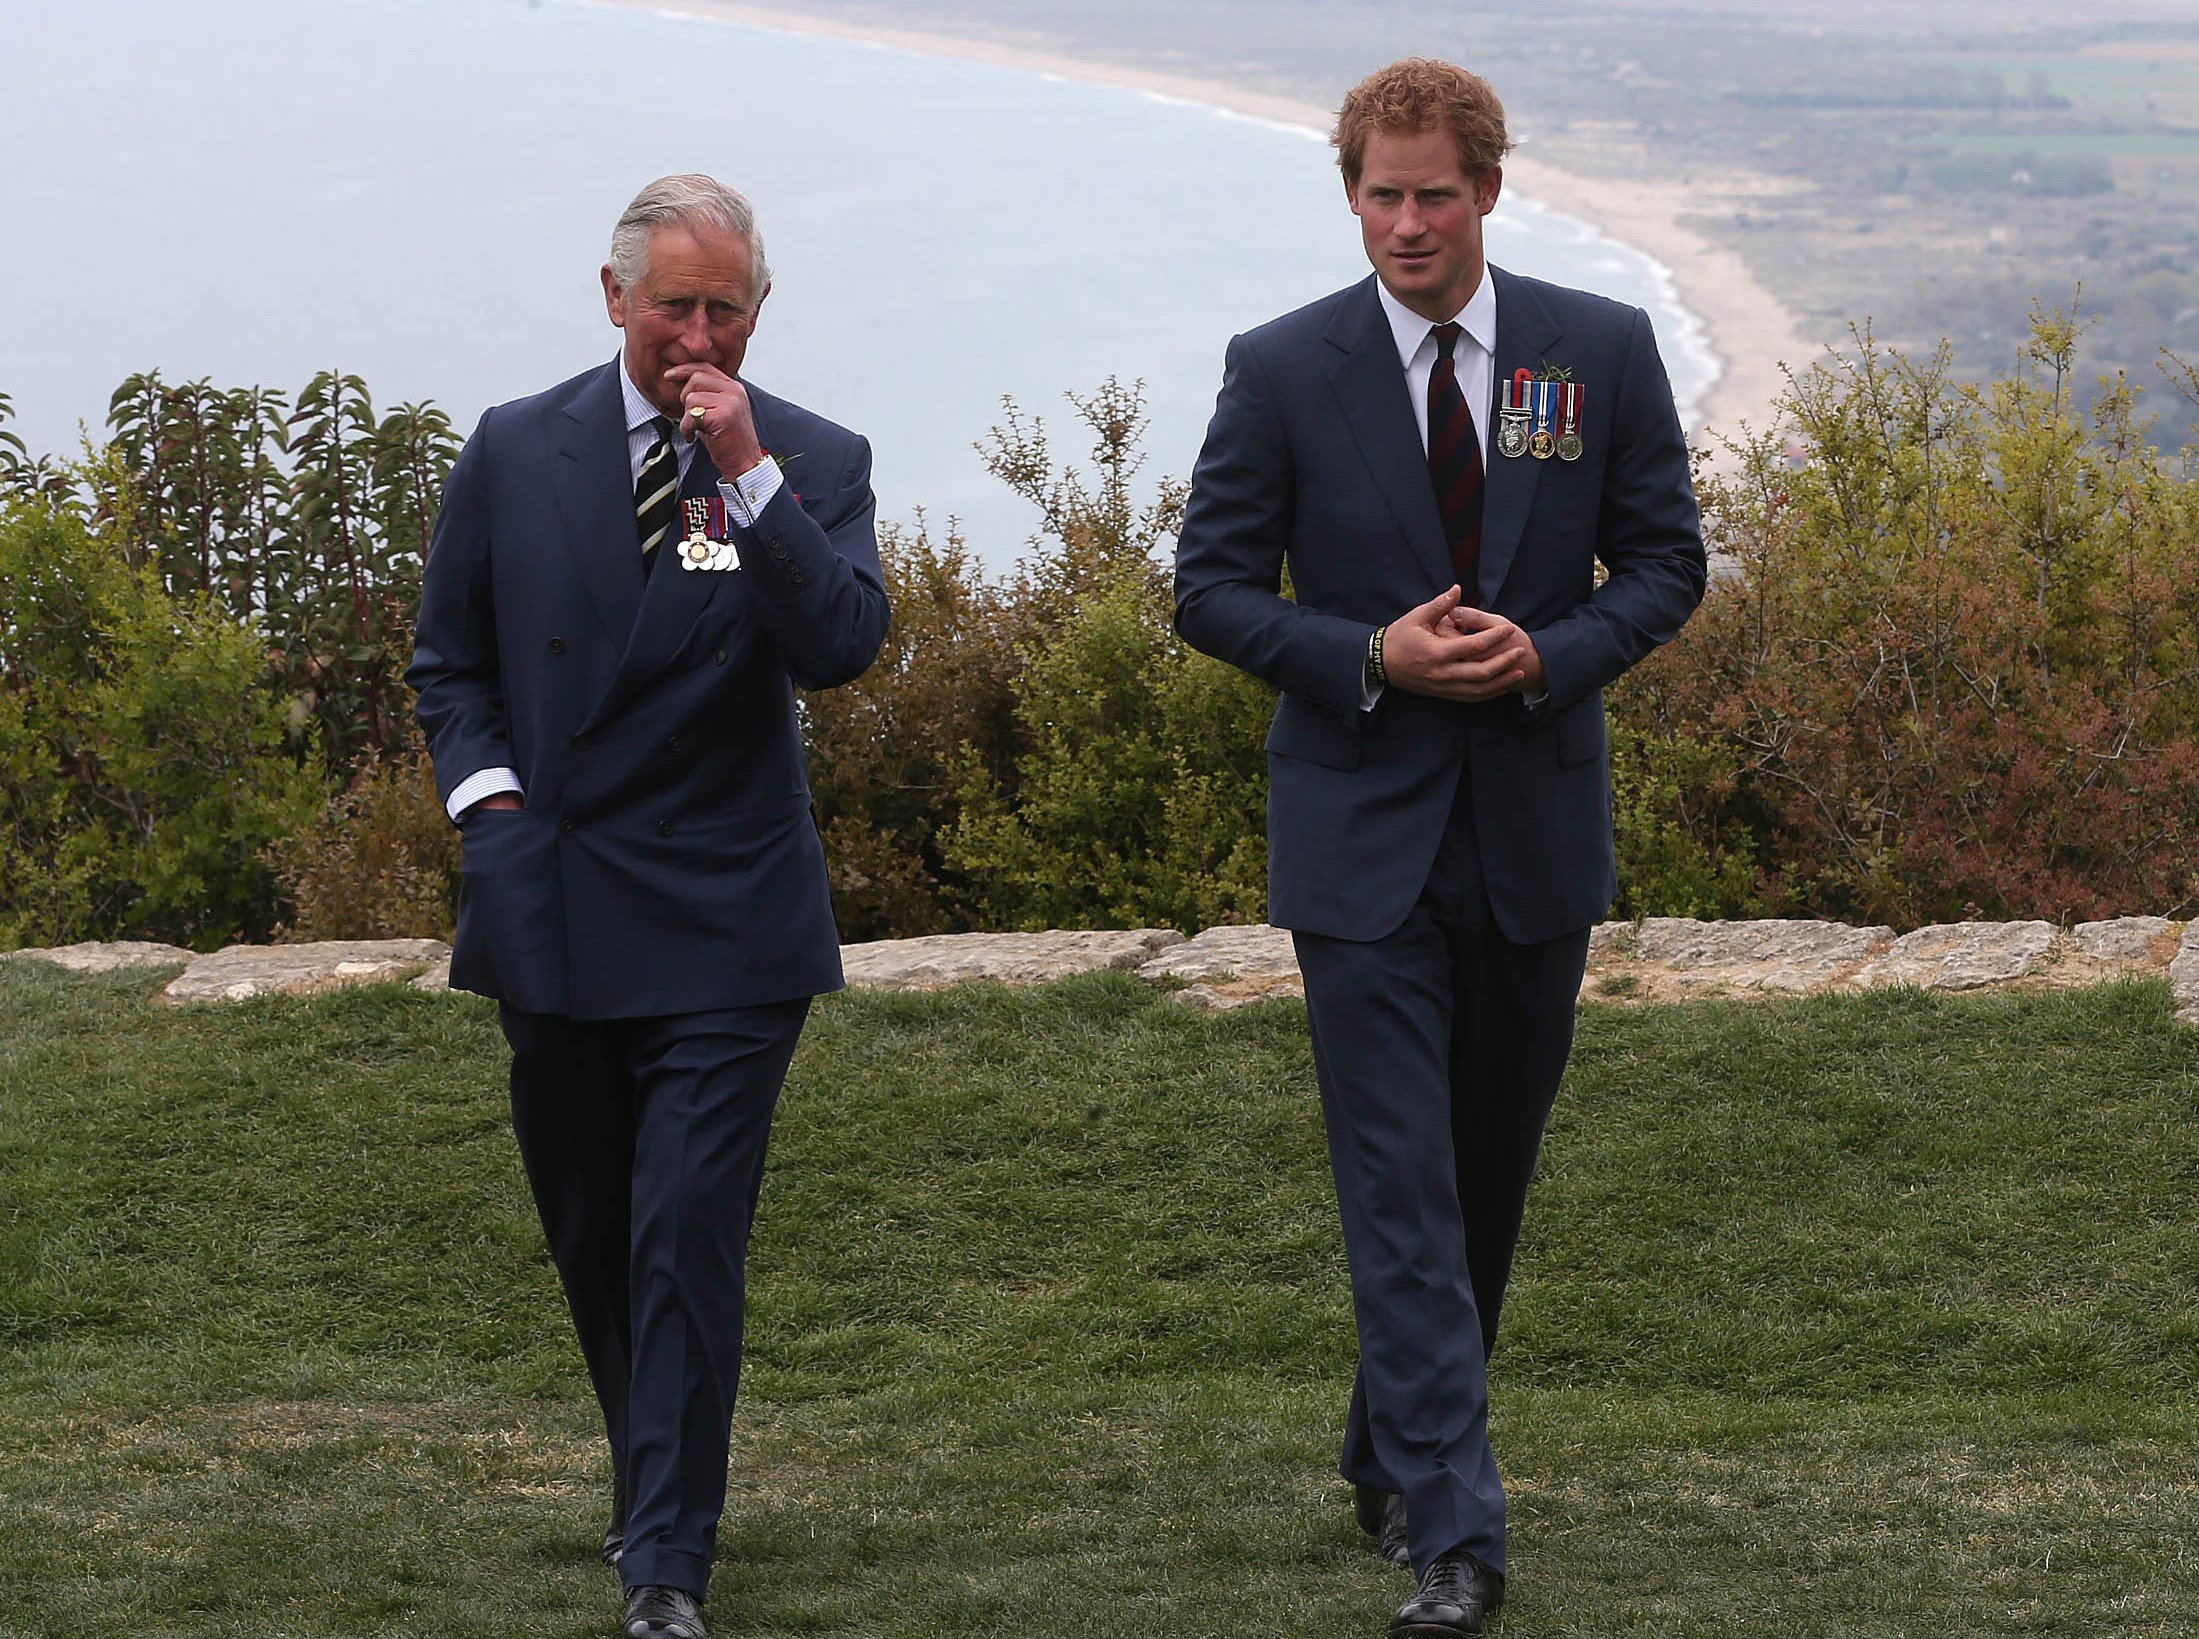 King Charles III and Prince Harry chat with one another during a visit to The Nek